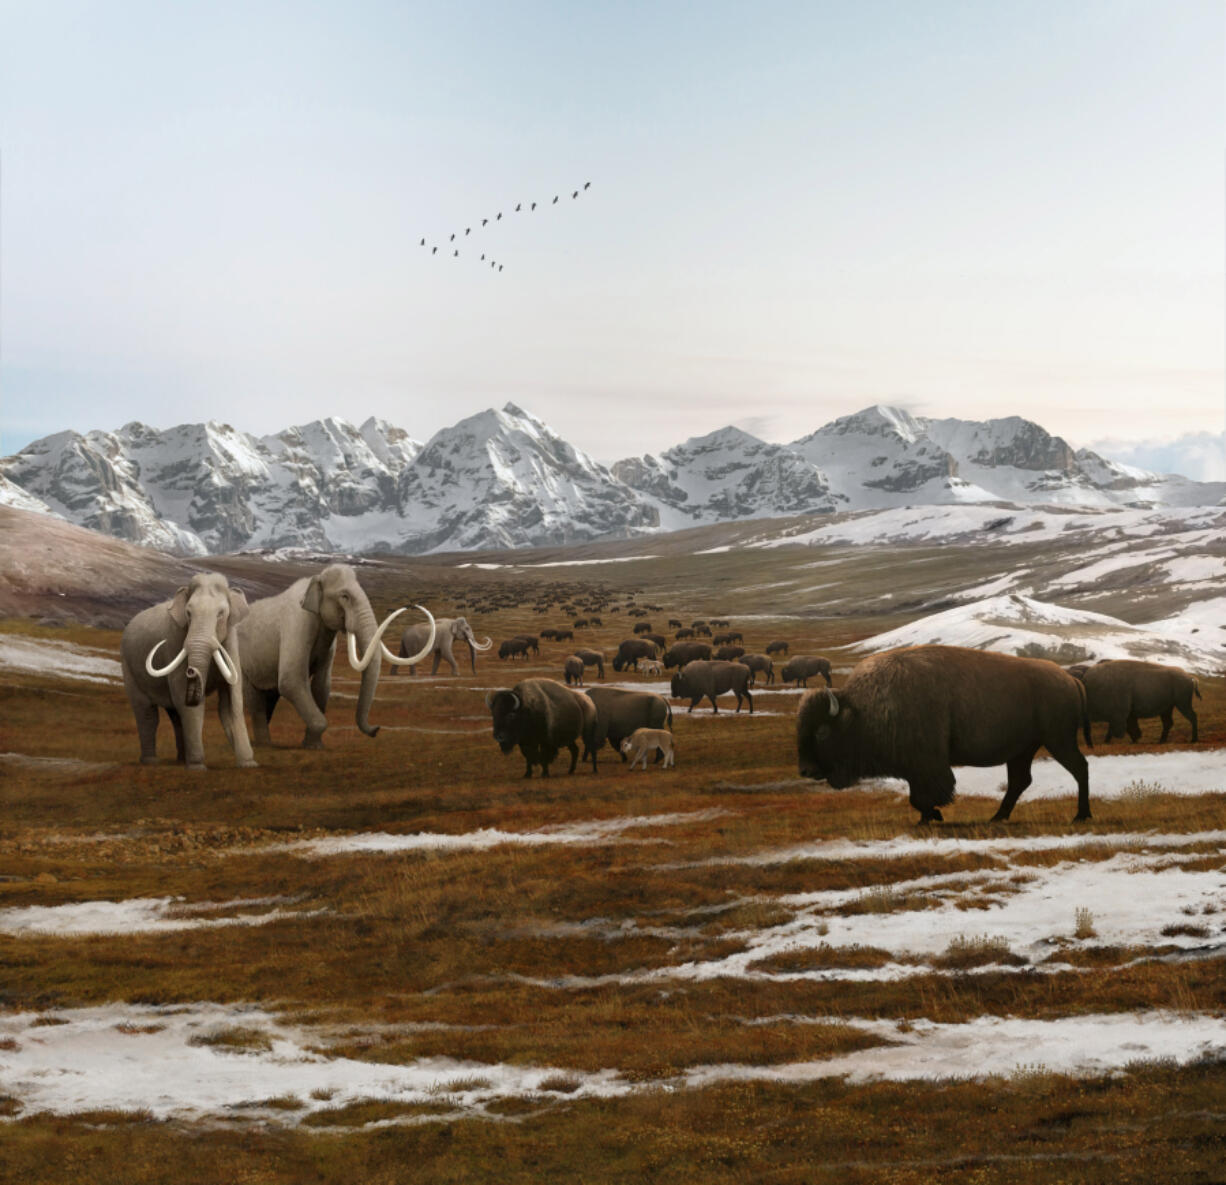 An imaginary view of Columbian mammoths (left) sharing Western Washington tundra with a herd of bison, in front of retreating glaciers at the end of the last Ice Age around 13,000 years ago. Illustration by Julio Lacerda for the Burke Museum, used with permission.